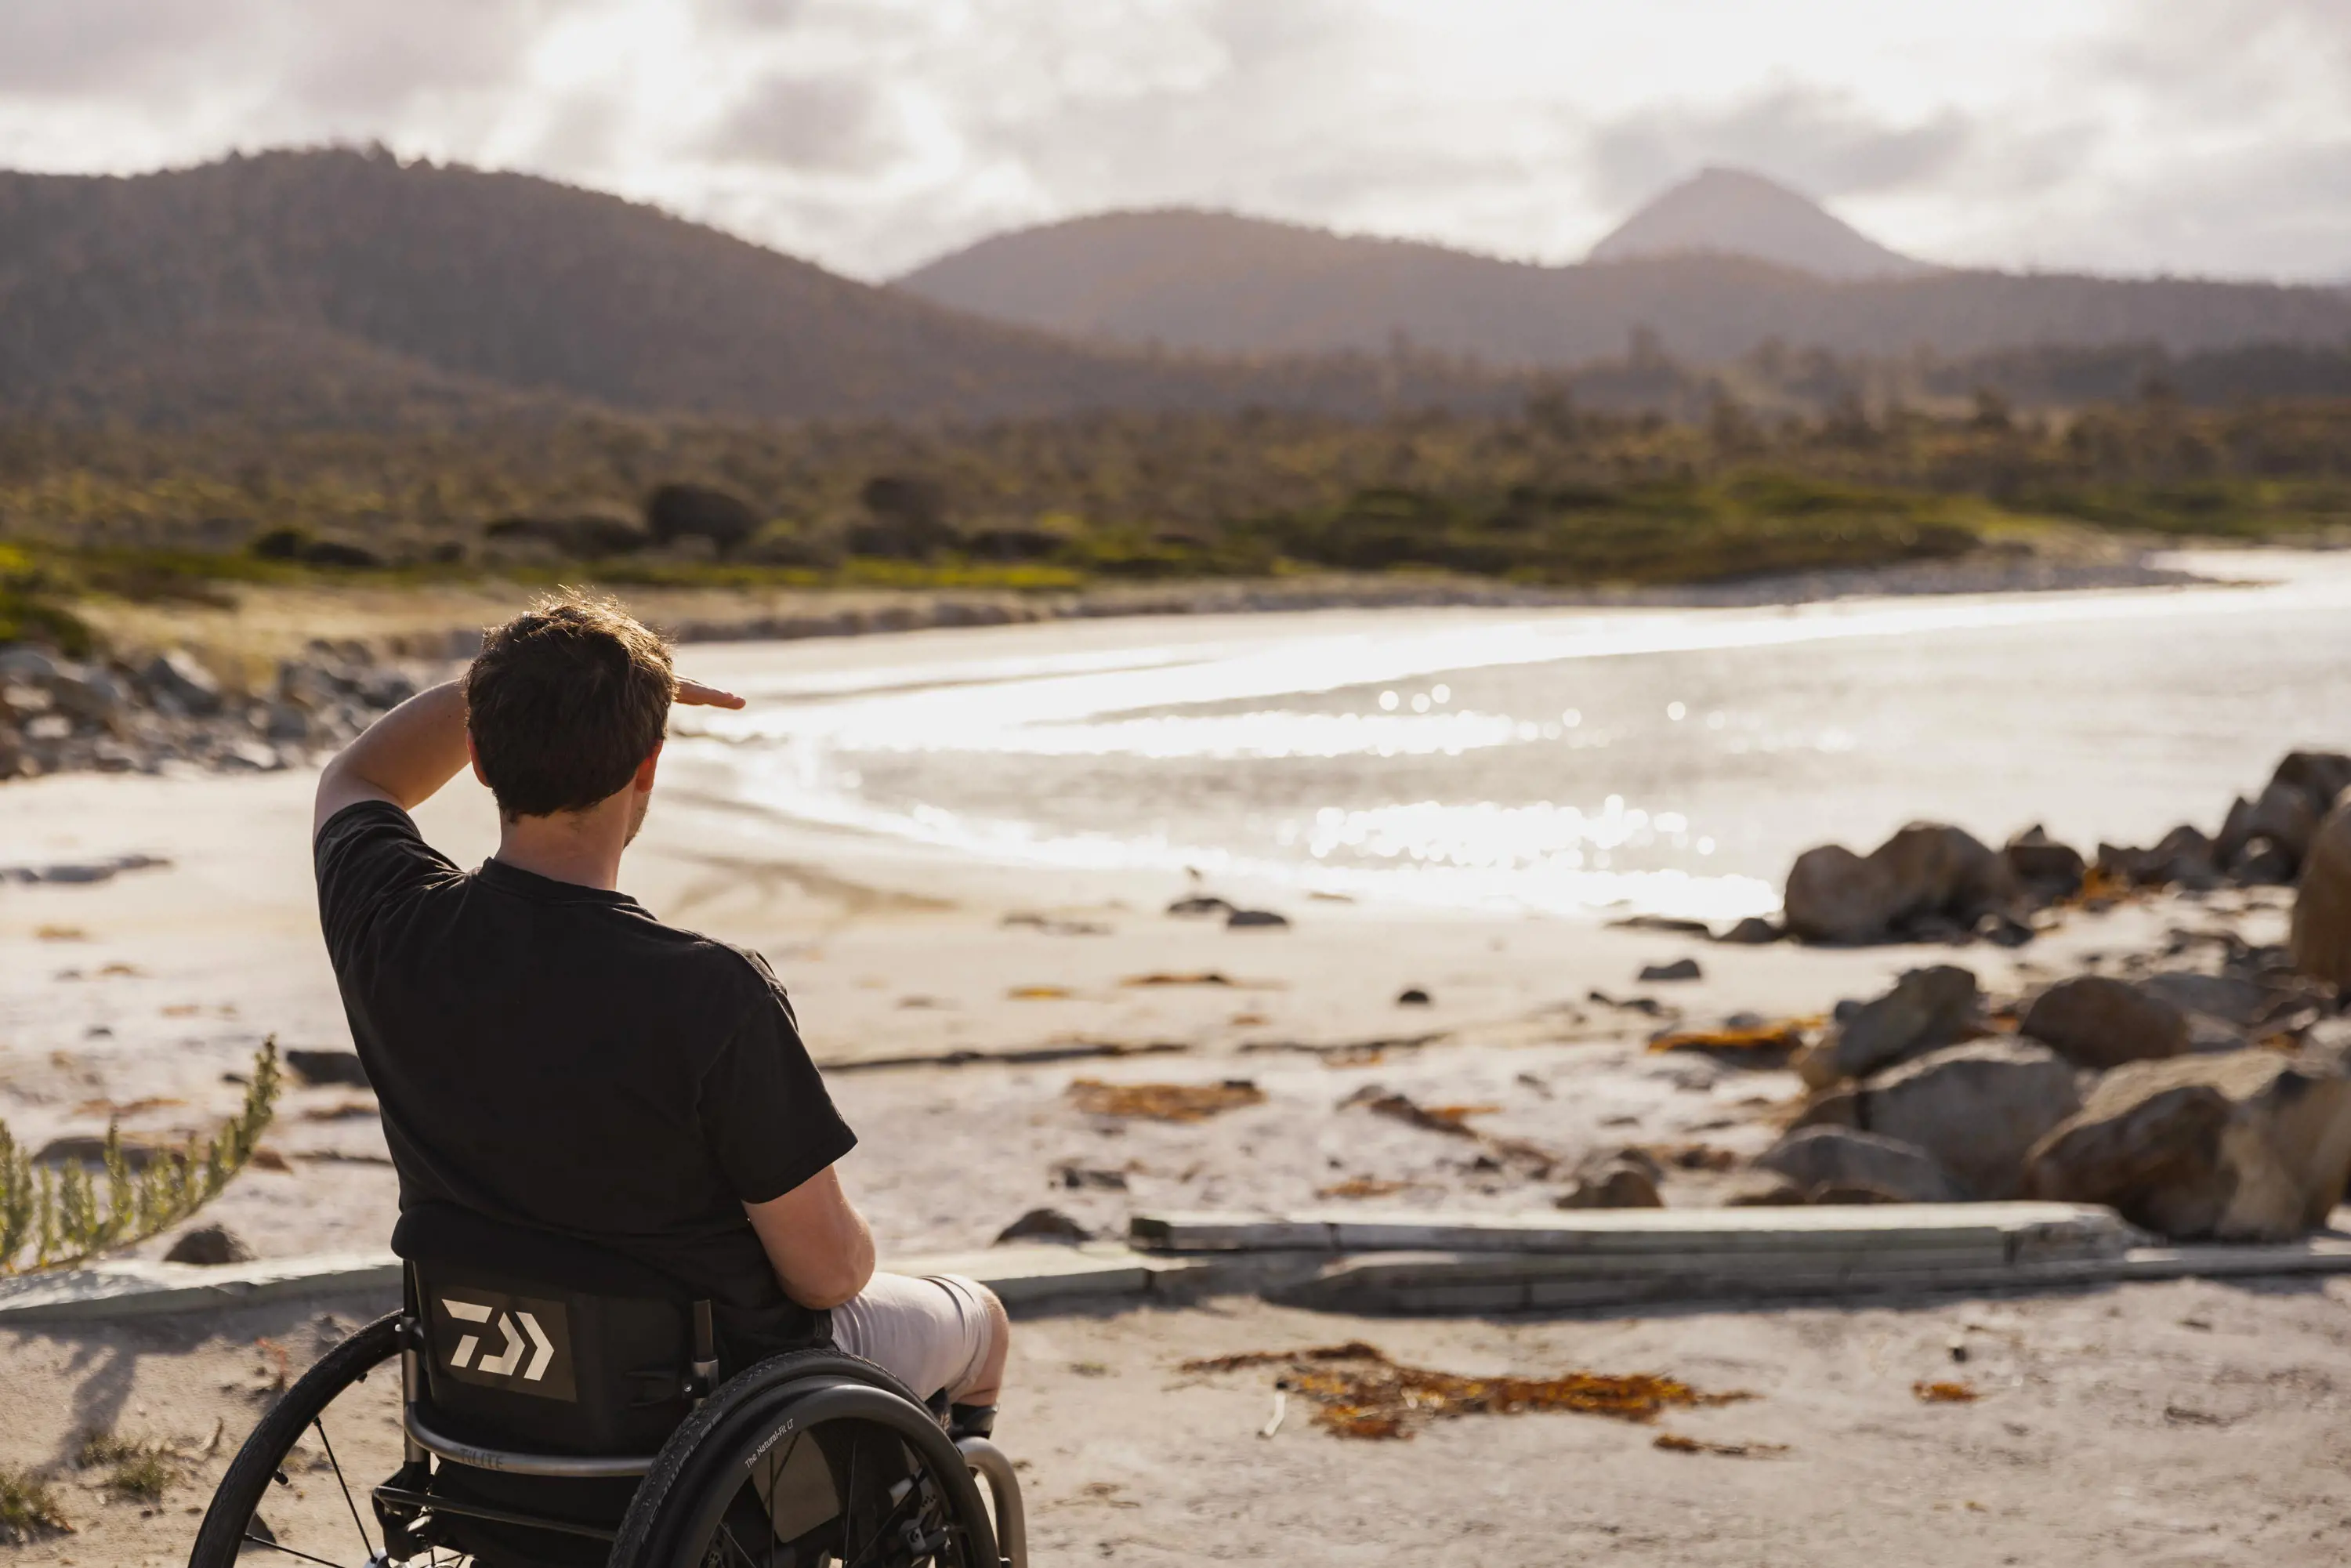 A young man wearing a t-shirt and sitting in a wheelchair looks out over a beach on a sunny day.